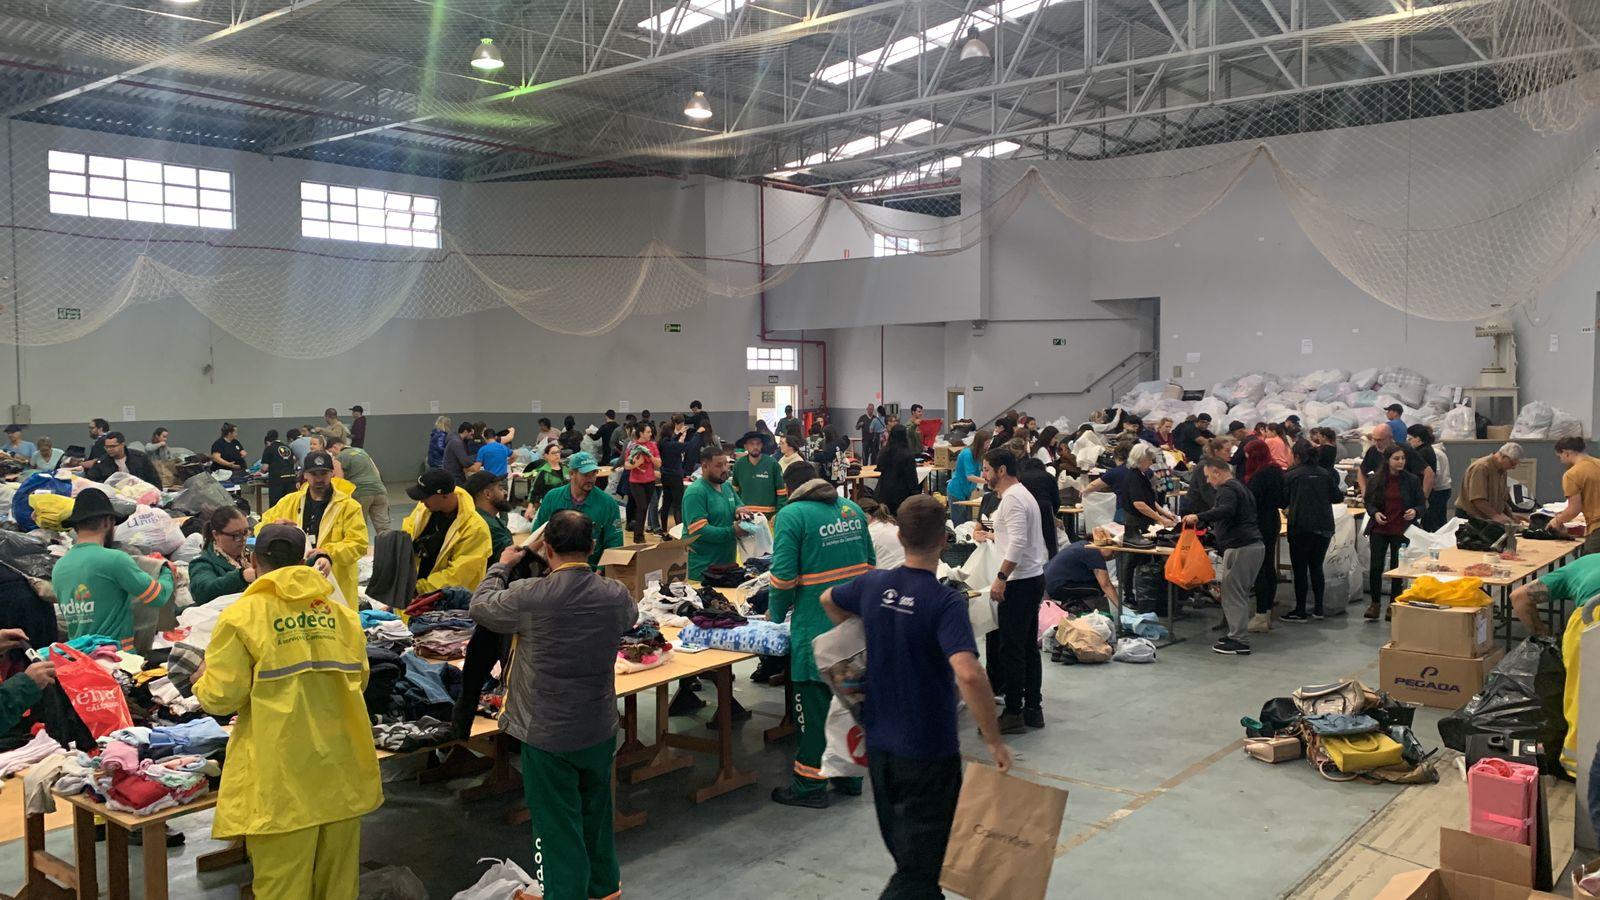 Church promotes relief for victims of floods in Brazil